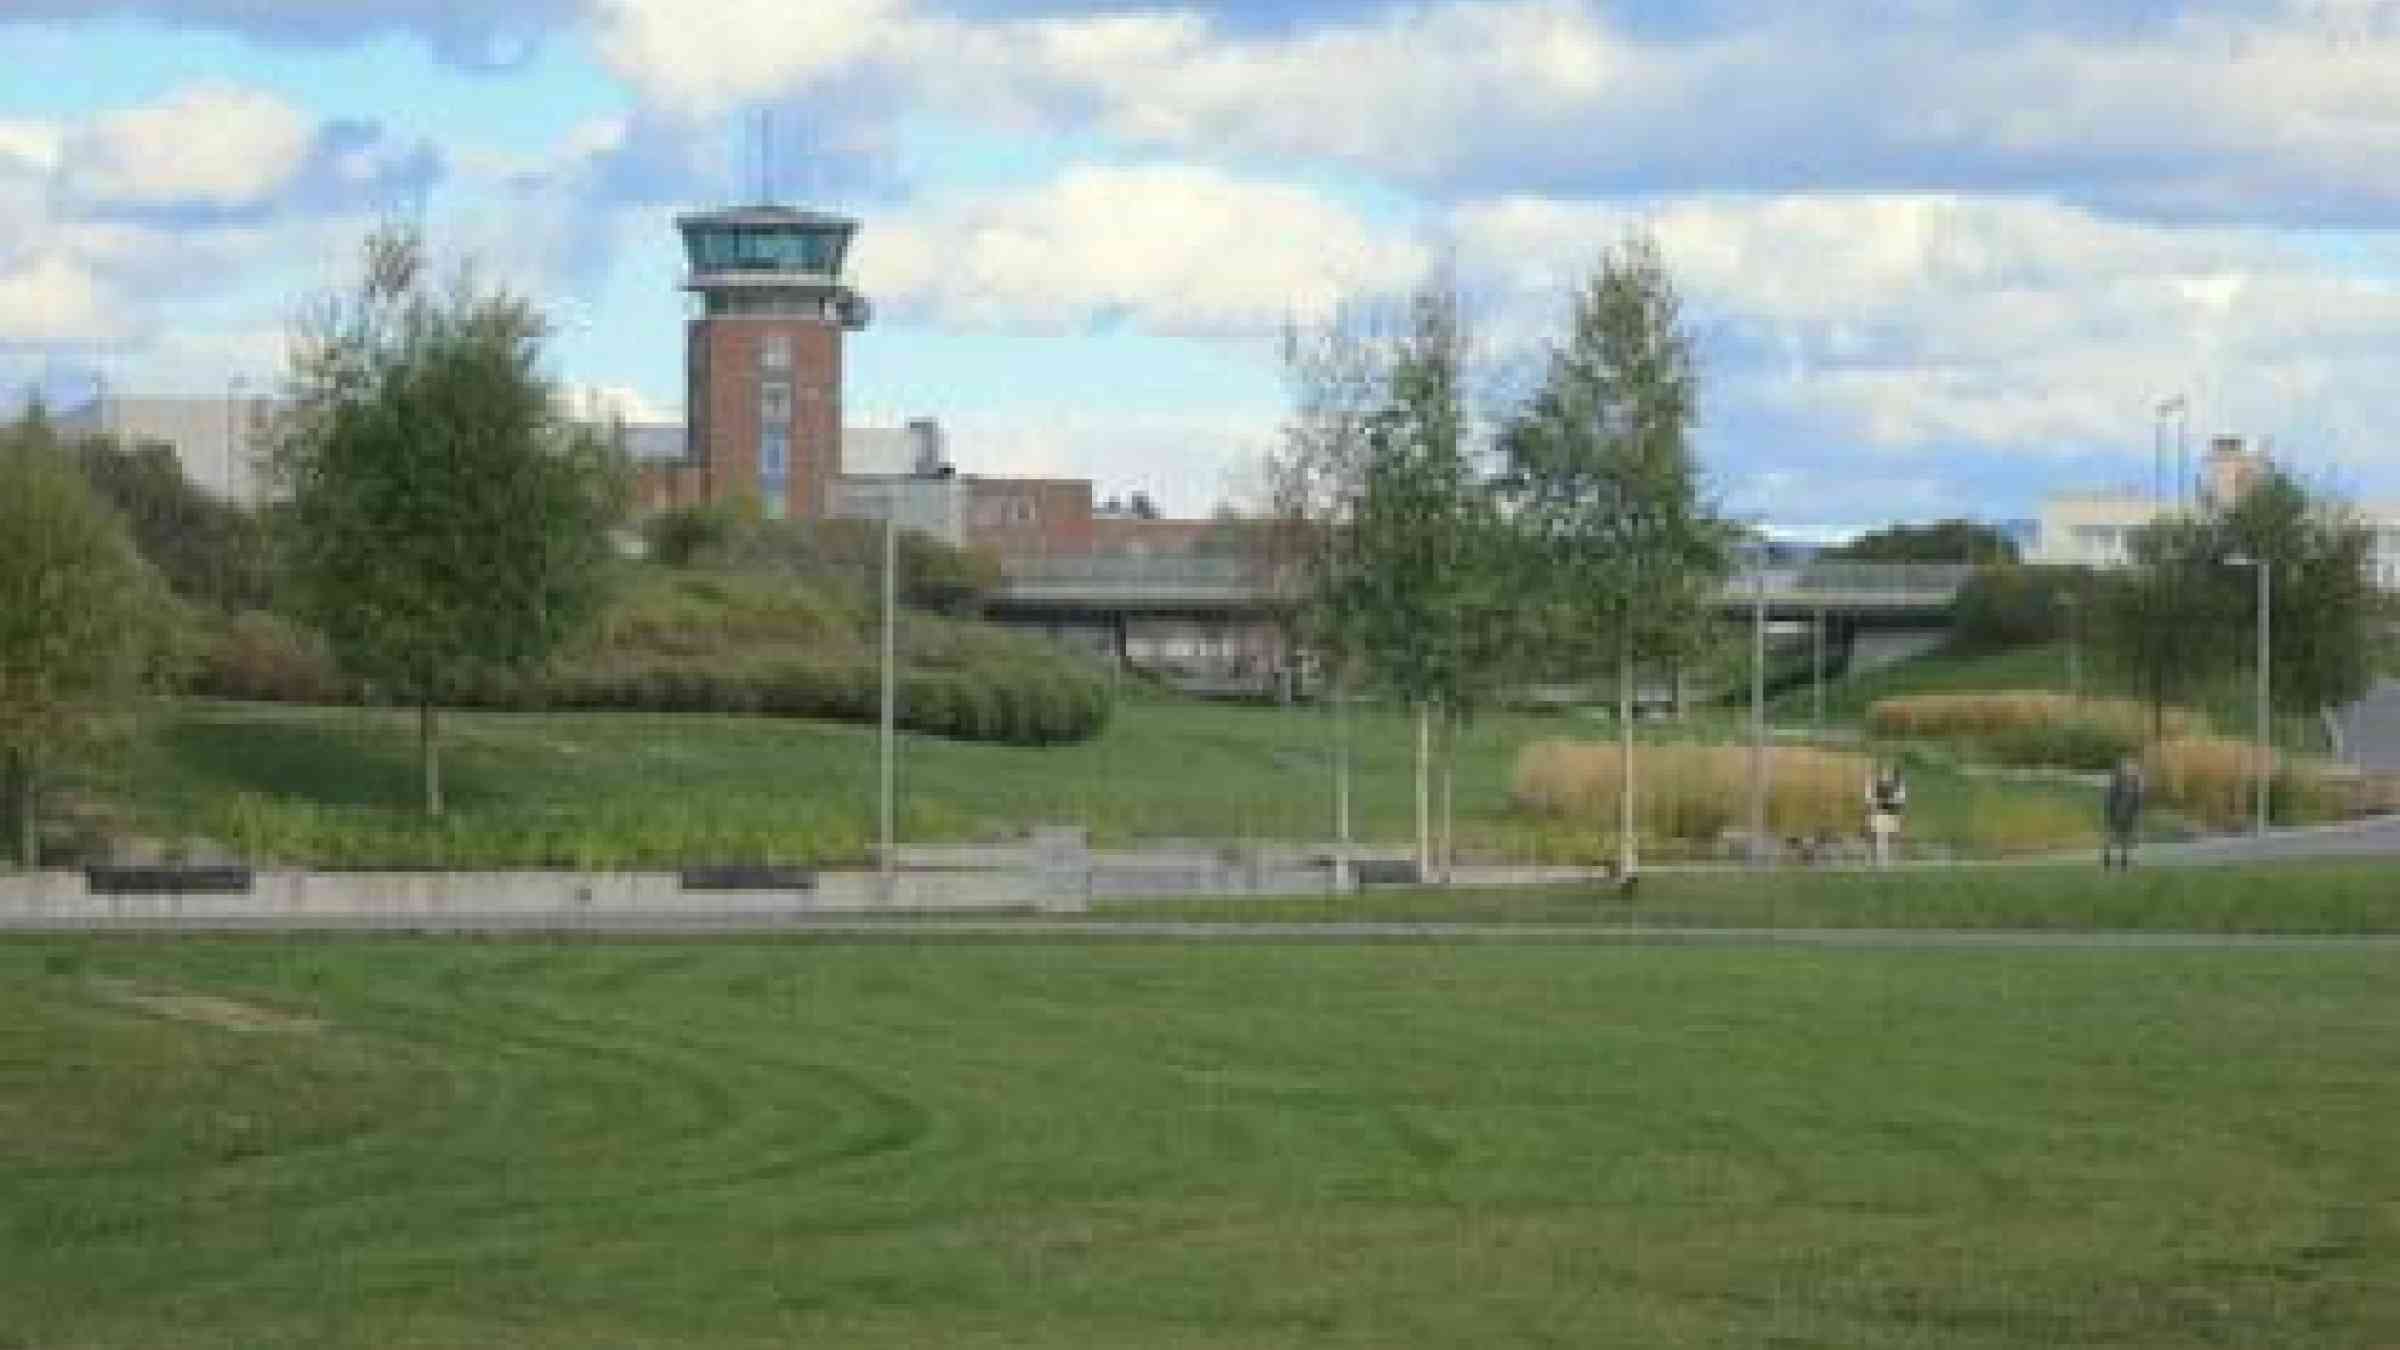 Closed in 1998, the control tower is the main remnant of the old Oslo airport and sits in the background of the new urban parkland at Fornebu.